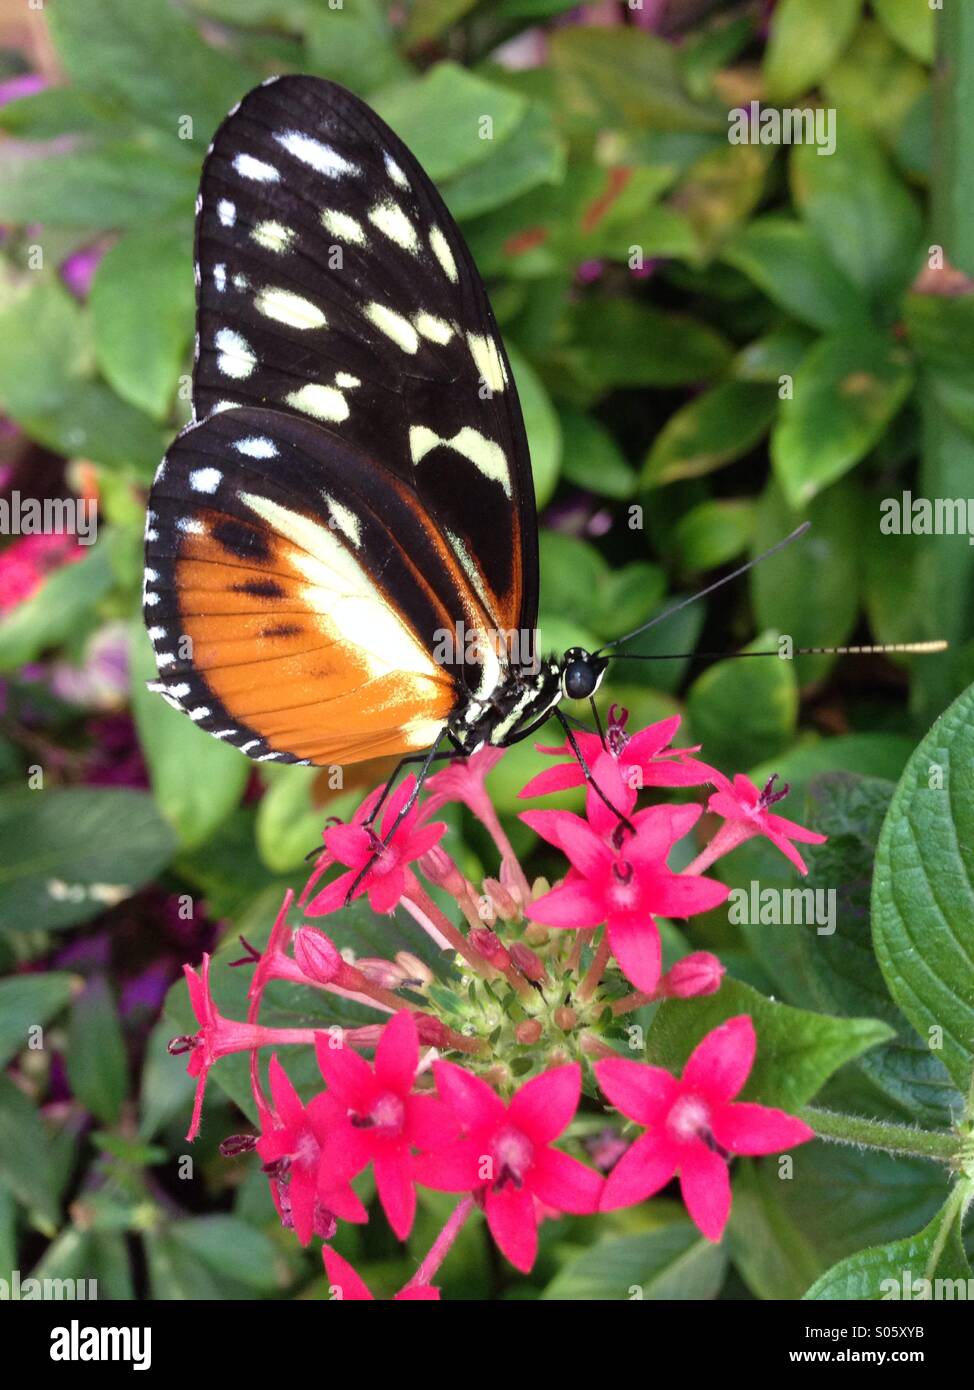 A heliconius butterfly feeds on nectar from a pentas flower Stock Photo